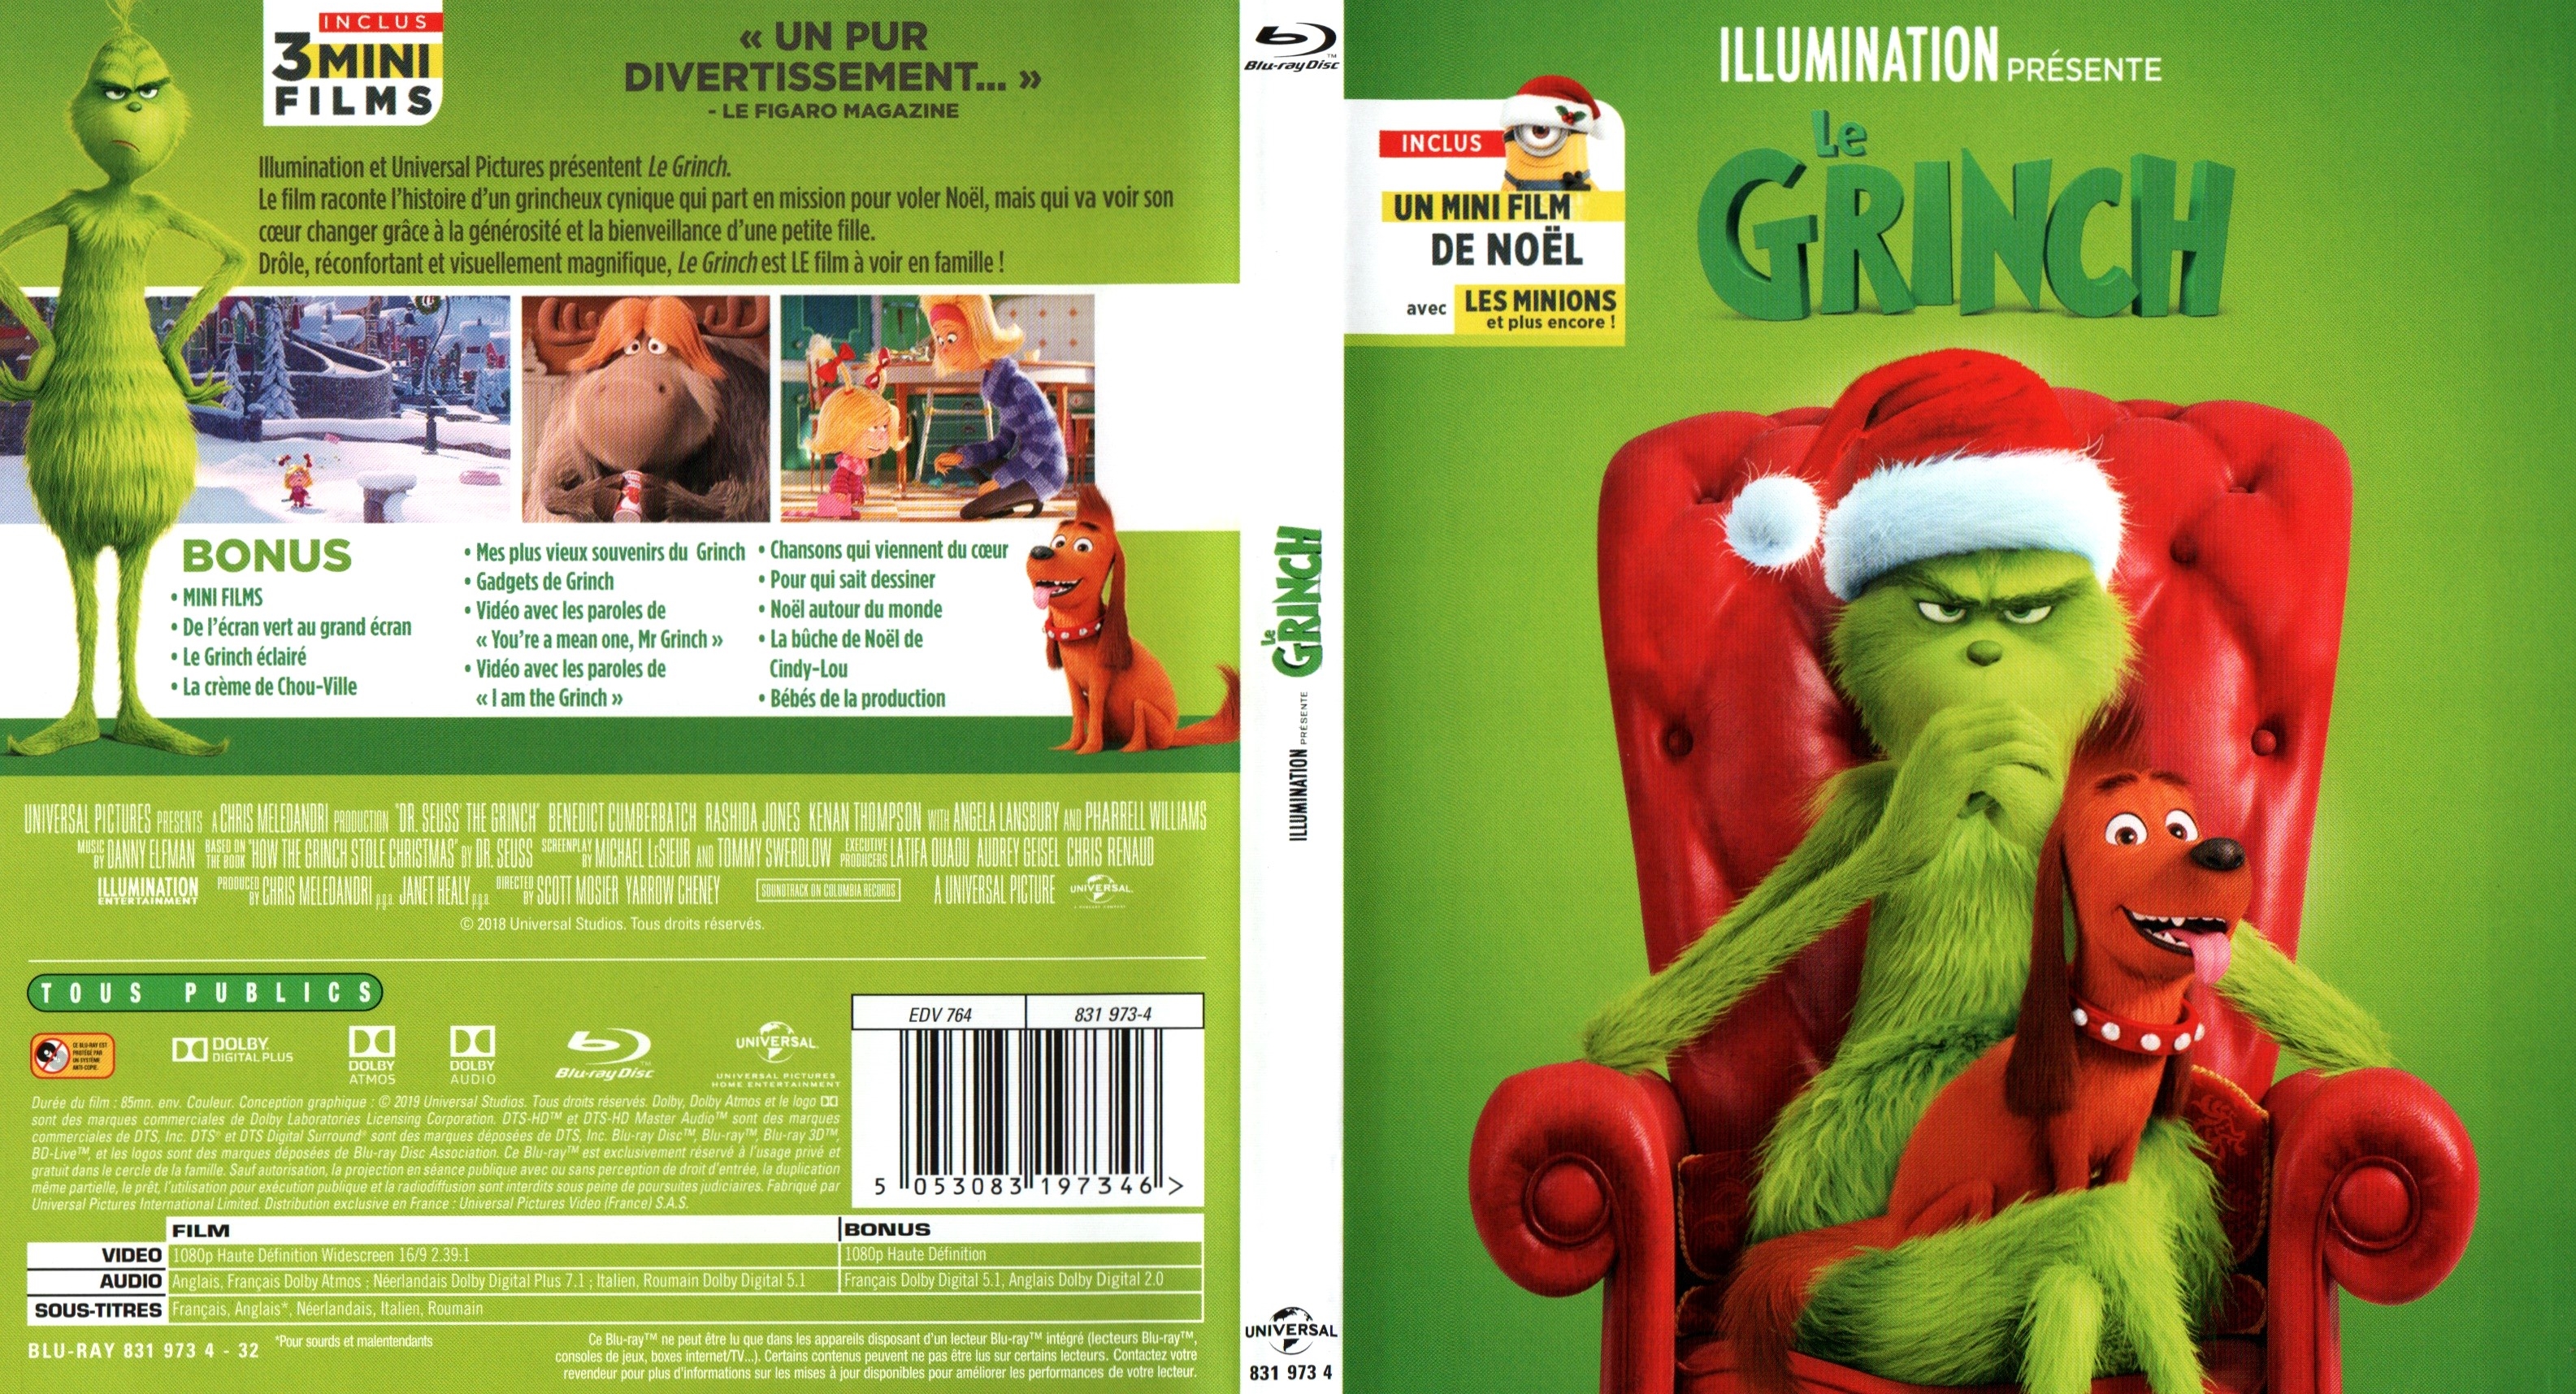 Jaquette DVD Le Grinch 2018 (BLU-RAY)